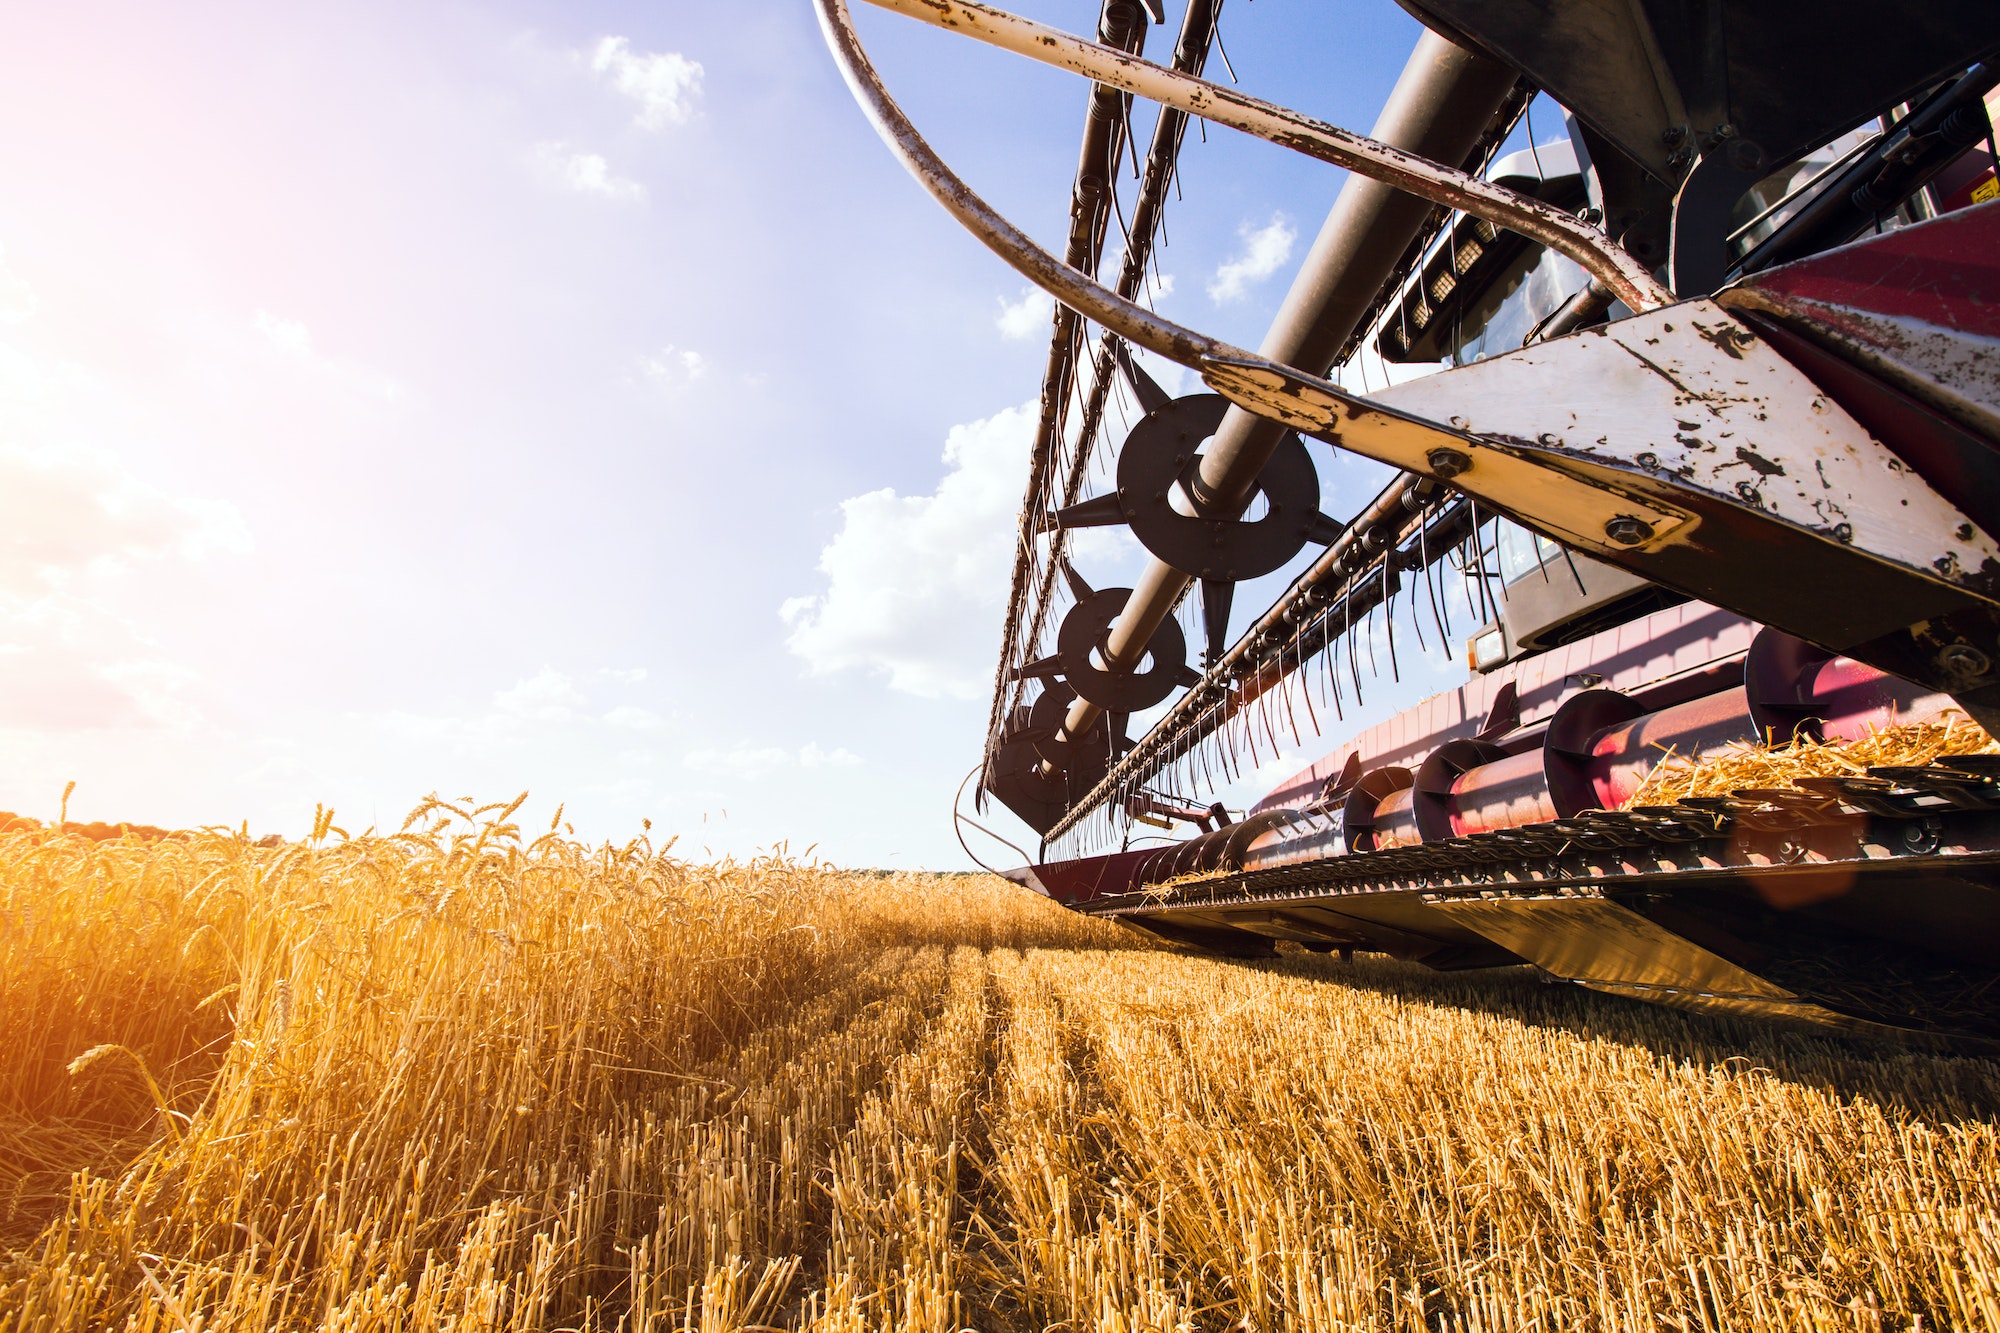 Photo of combine harvester that is harvesting wheat